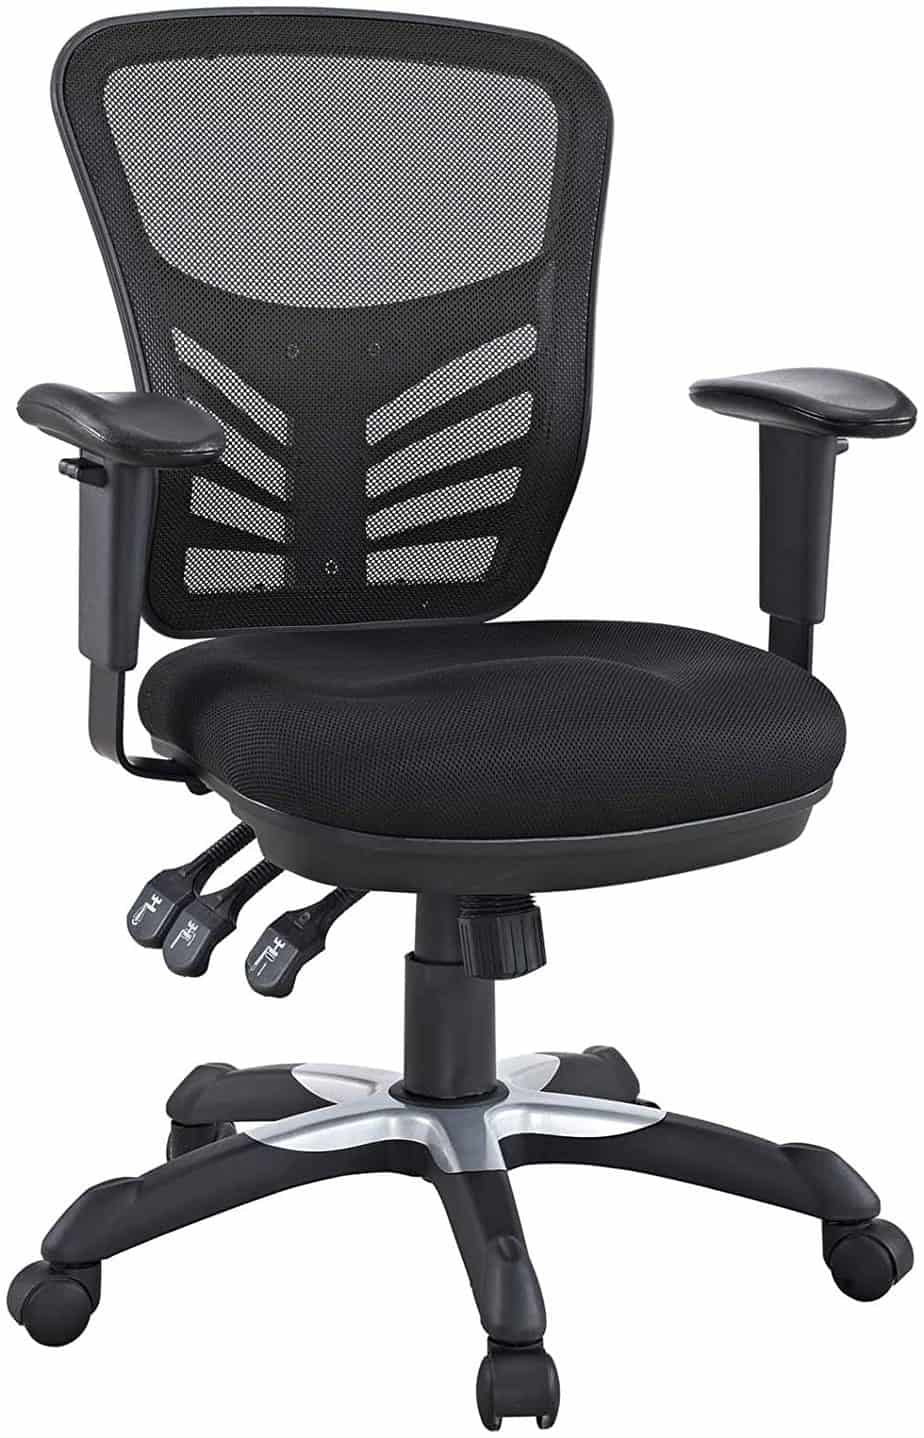 The Buyers Guide To The 9 Best Office Chair For Sciatica